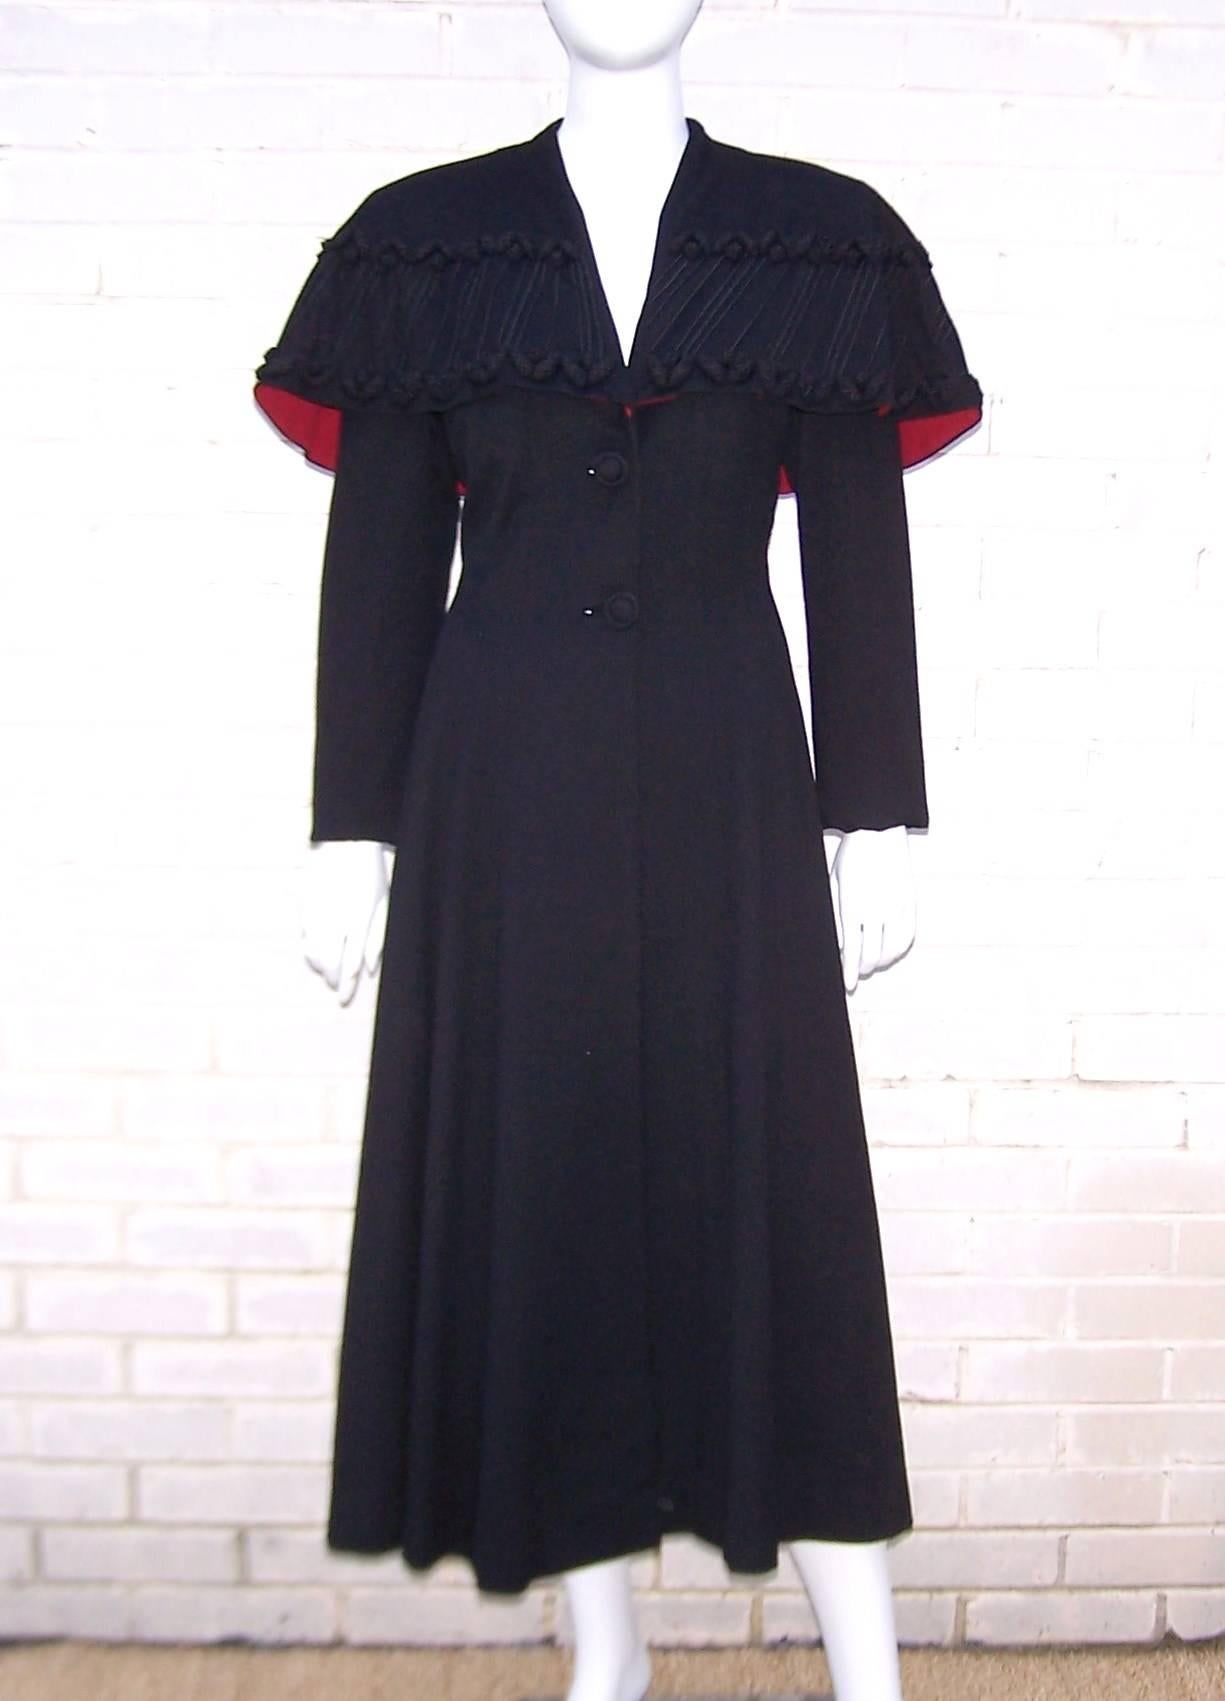 What a stunner!  Eisenberg is best known for producing high quality costume jewelry though they also created clothing until the 1950's.  This 1940's black wool coat has a classic princess coat silhouette with the addition of strong 1940's shoulders